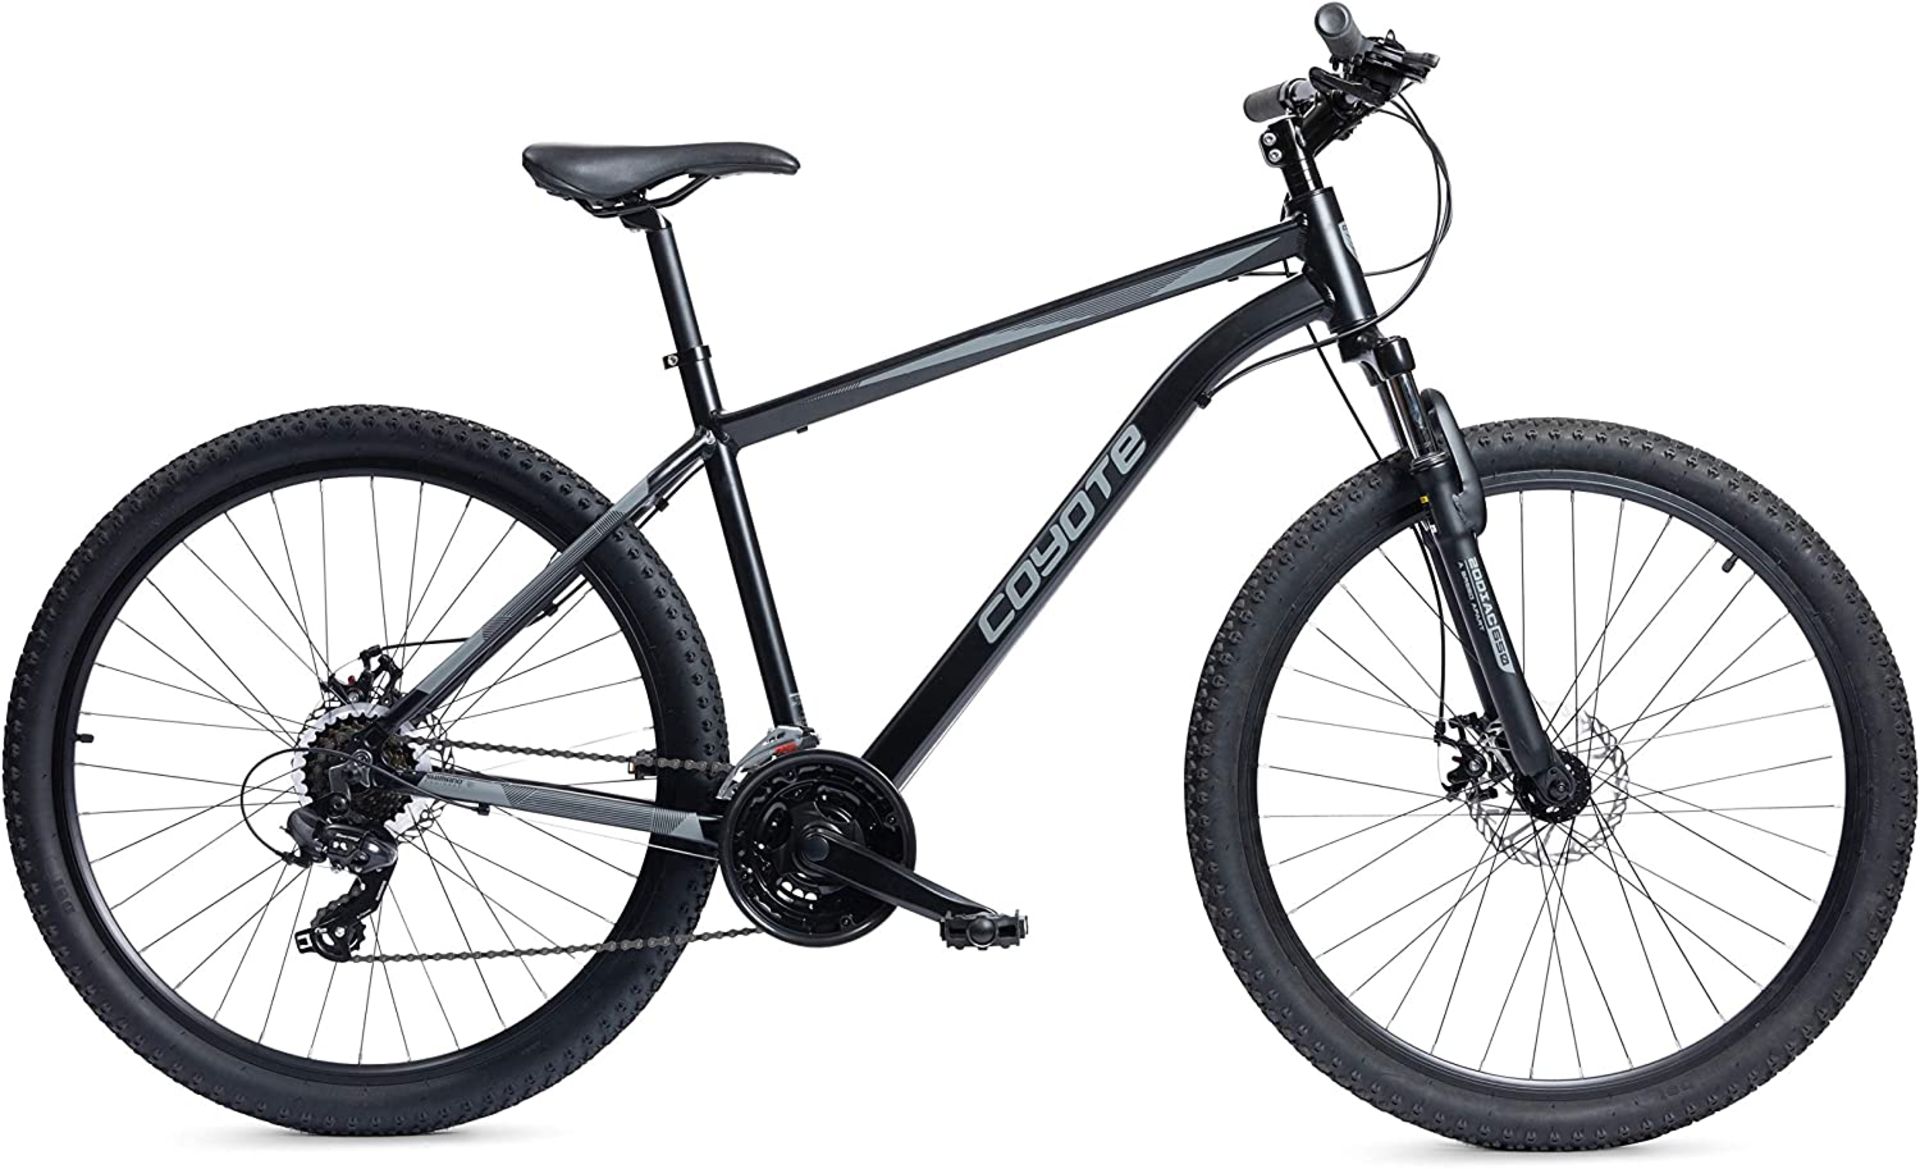 Coyote Origin 22" 700c 18Spd. RRP £375.00. Equipped with 18 speed Shimano gearing to minimise the